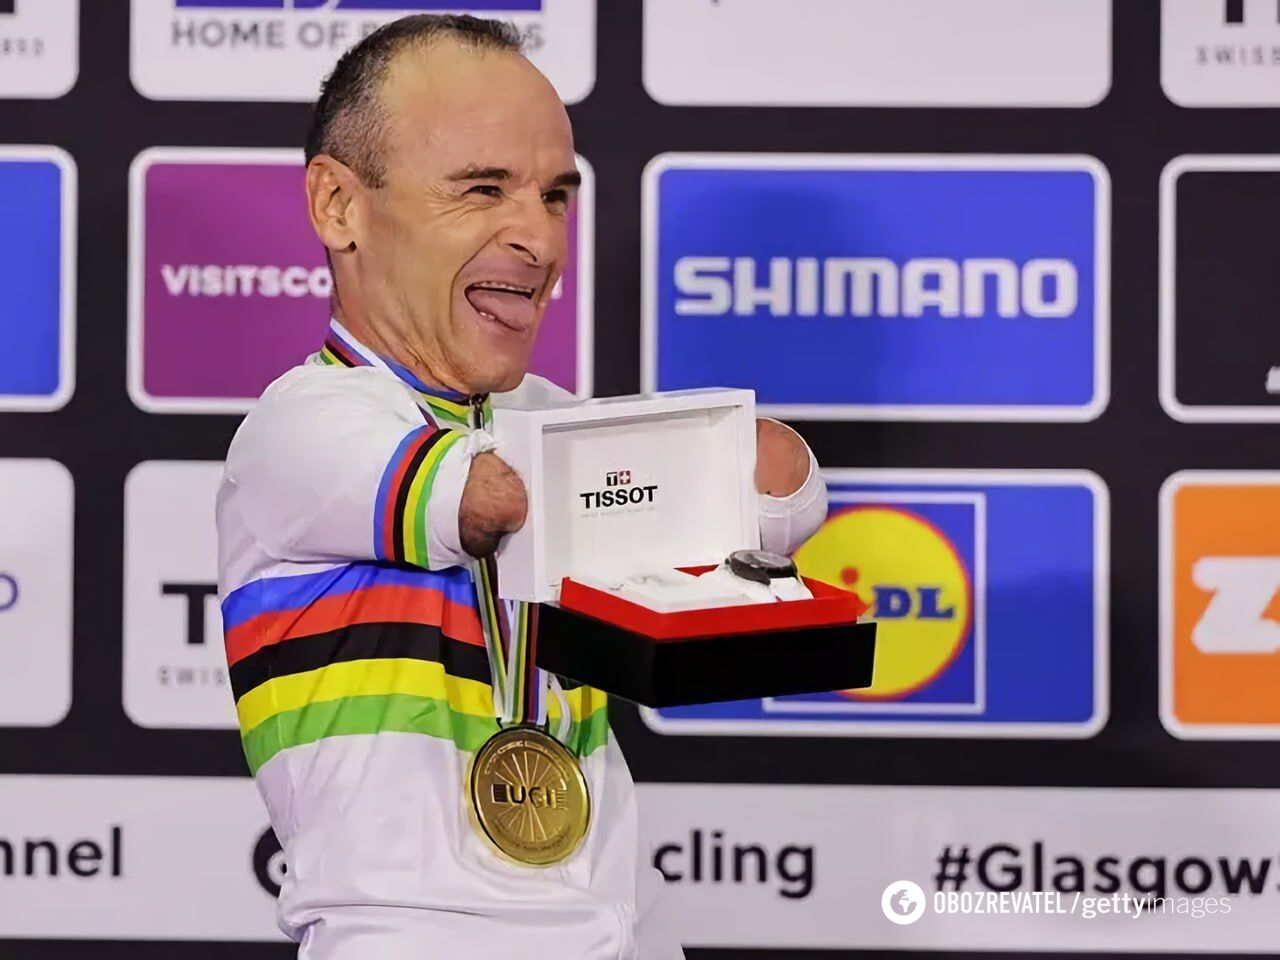 An armless cyclist won the world championship. He was awarded a wristwatch. Video